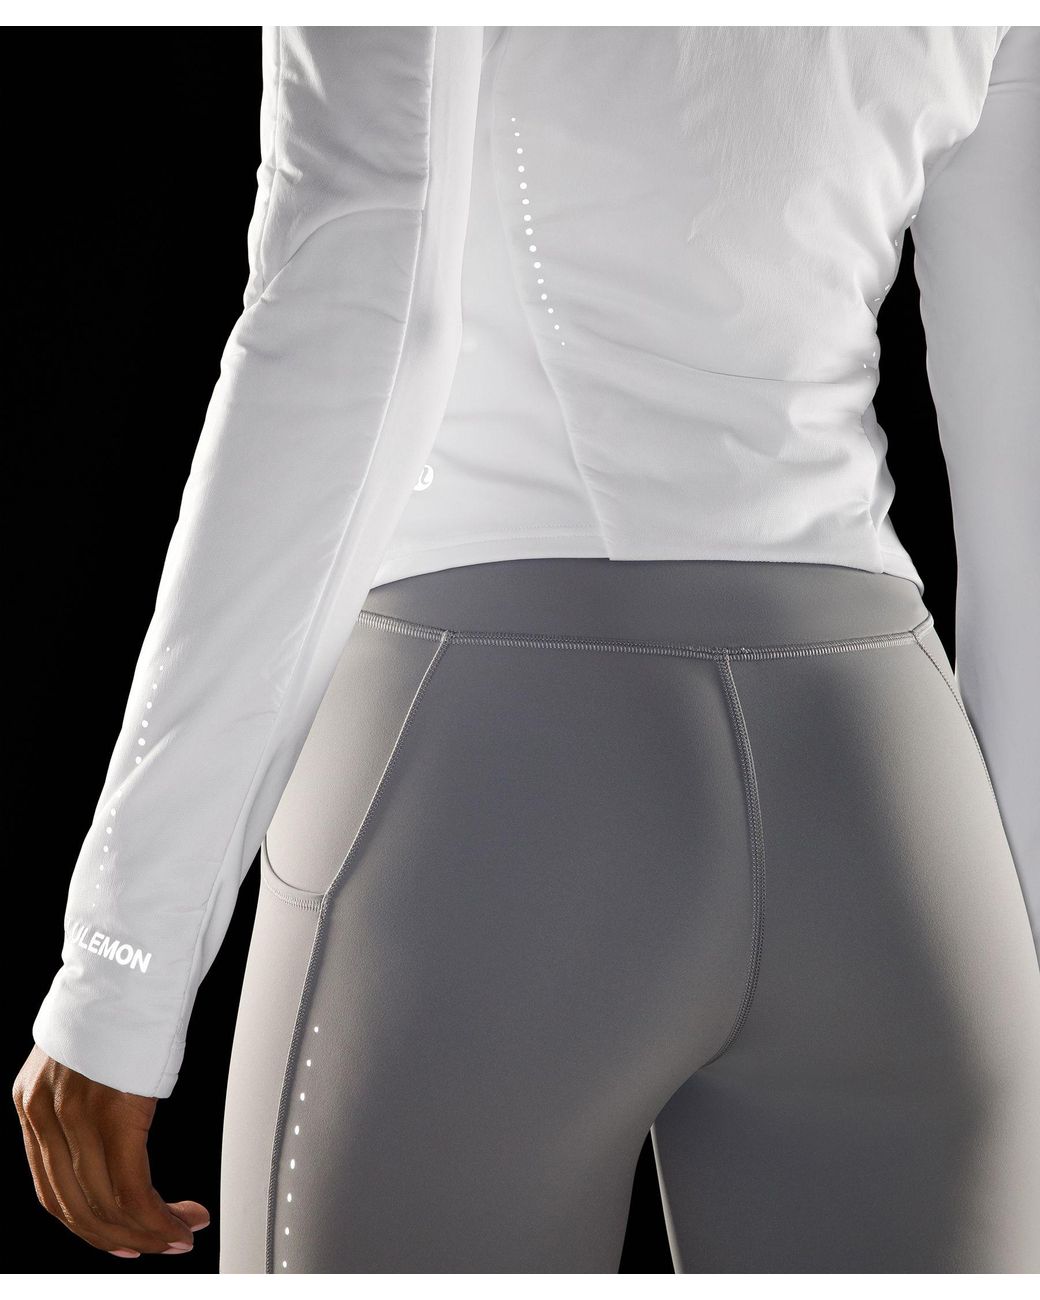 Tightest Stuff HR Tight 25 in Plumful (12) and Ventilate Jacket in  White/white (12). Love this set😍 : r/lululemon